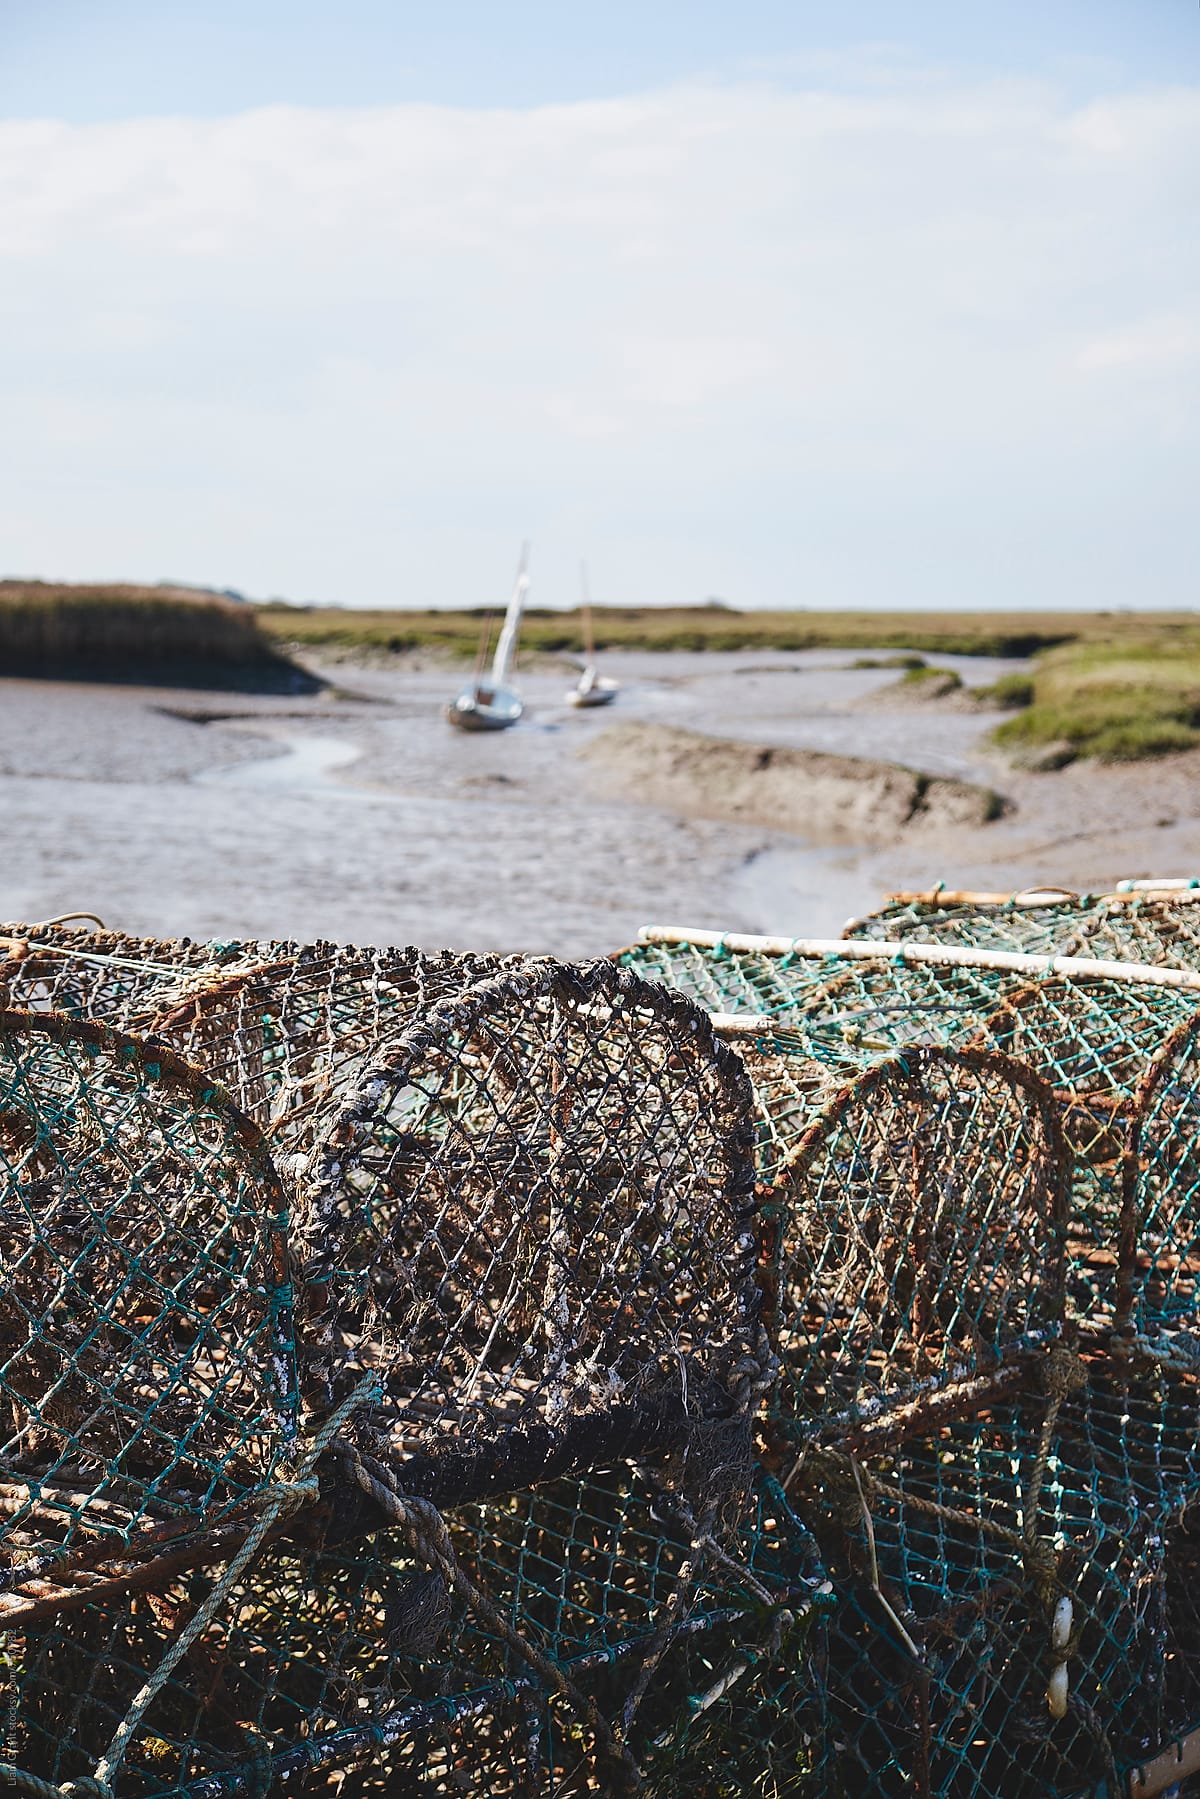 Lobster pots and sailing boats at low tide. Brancaster Staithe, Norfolk, UK.